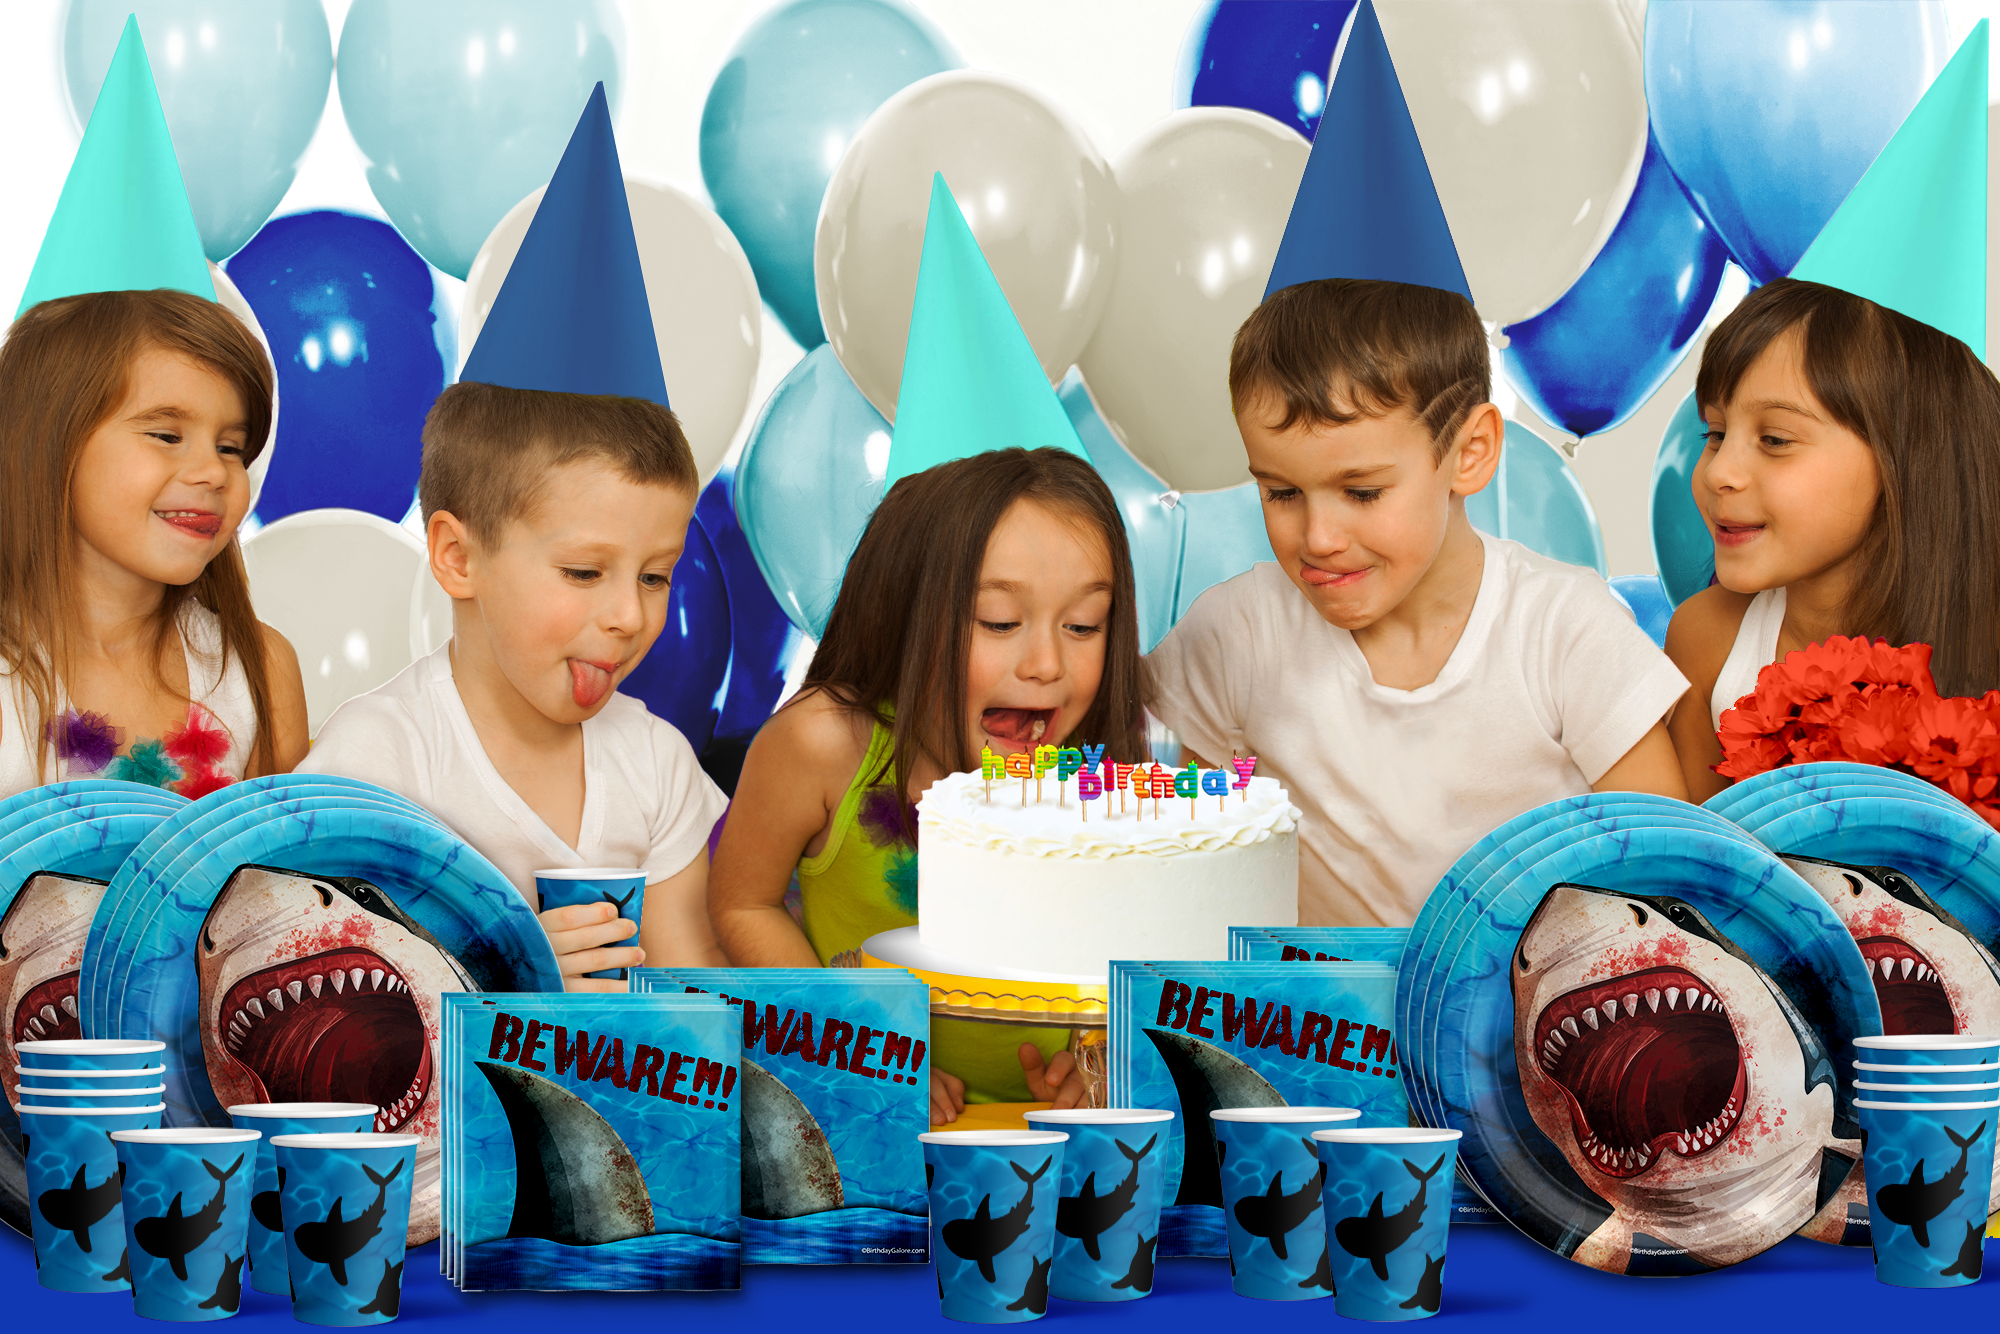 Shark Attack! Birthday Party Tableware Kit For 16 Guests